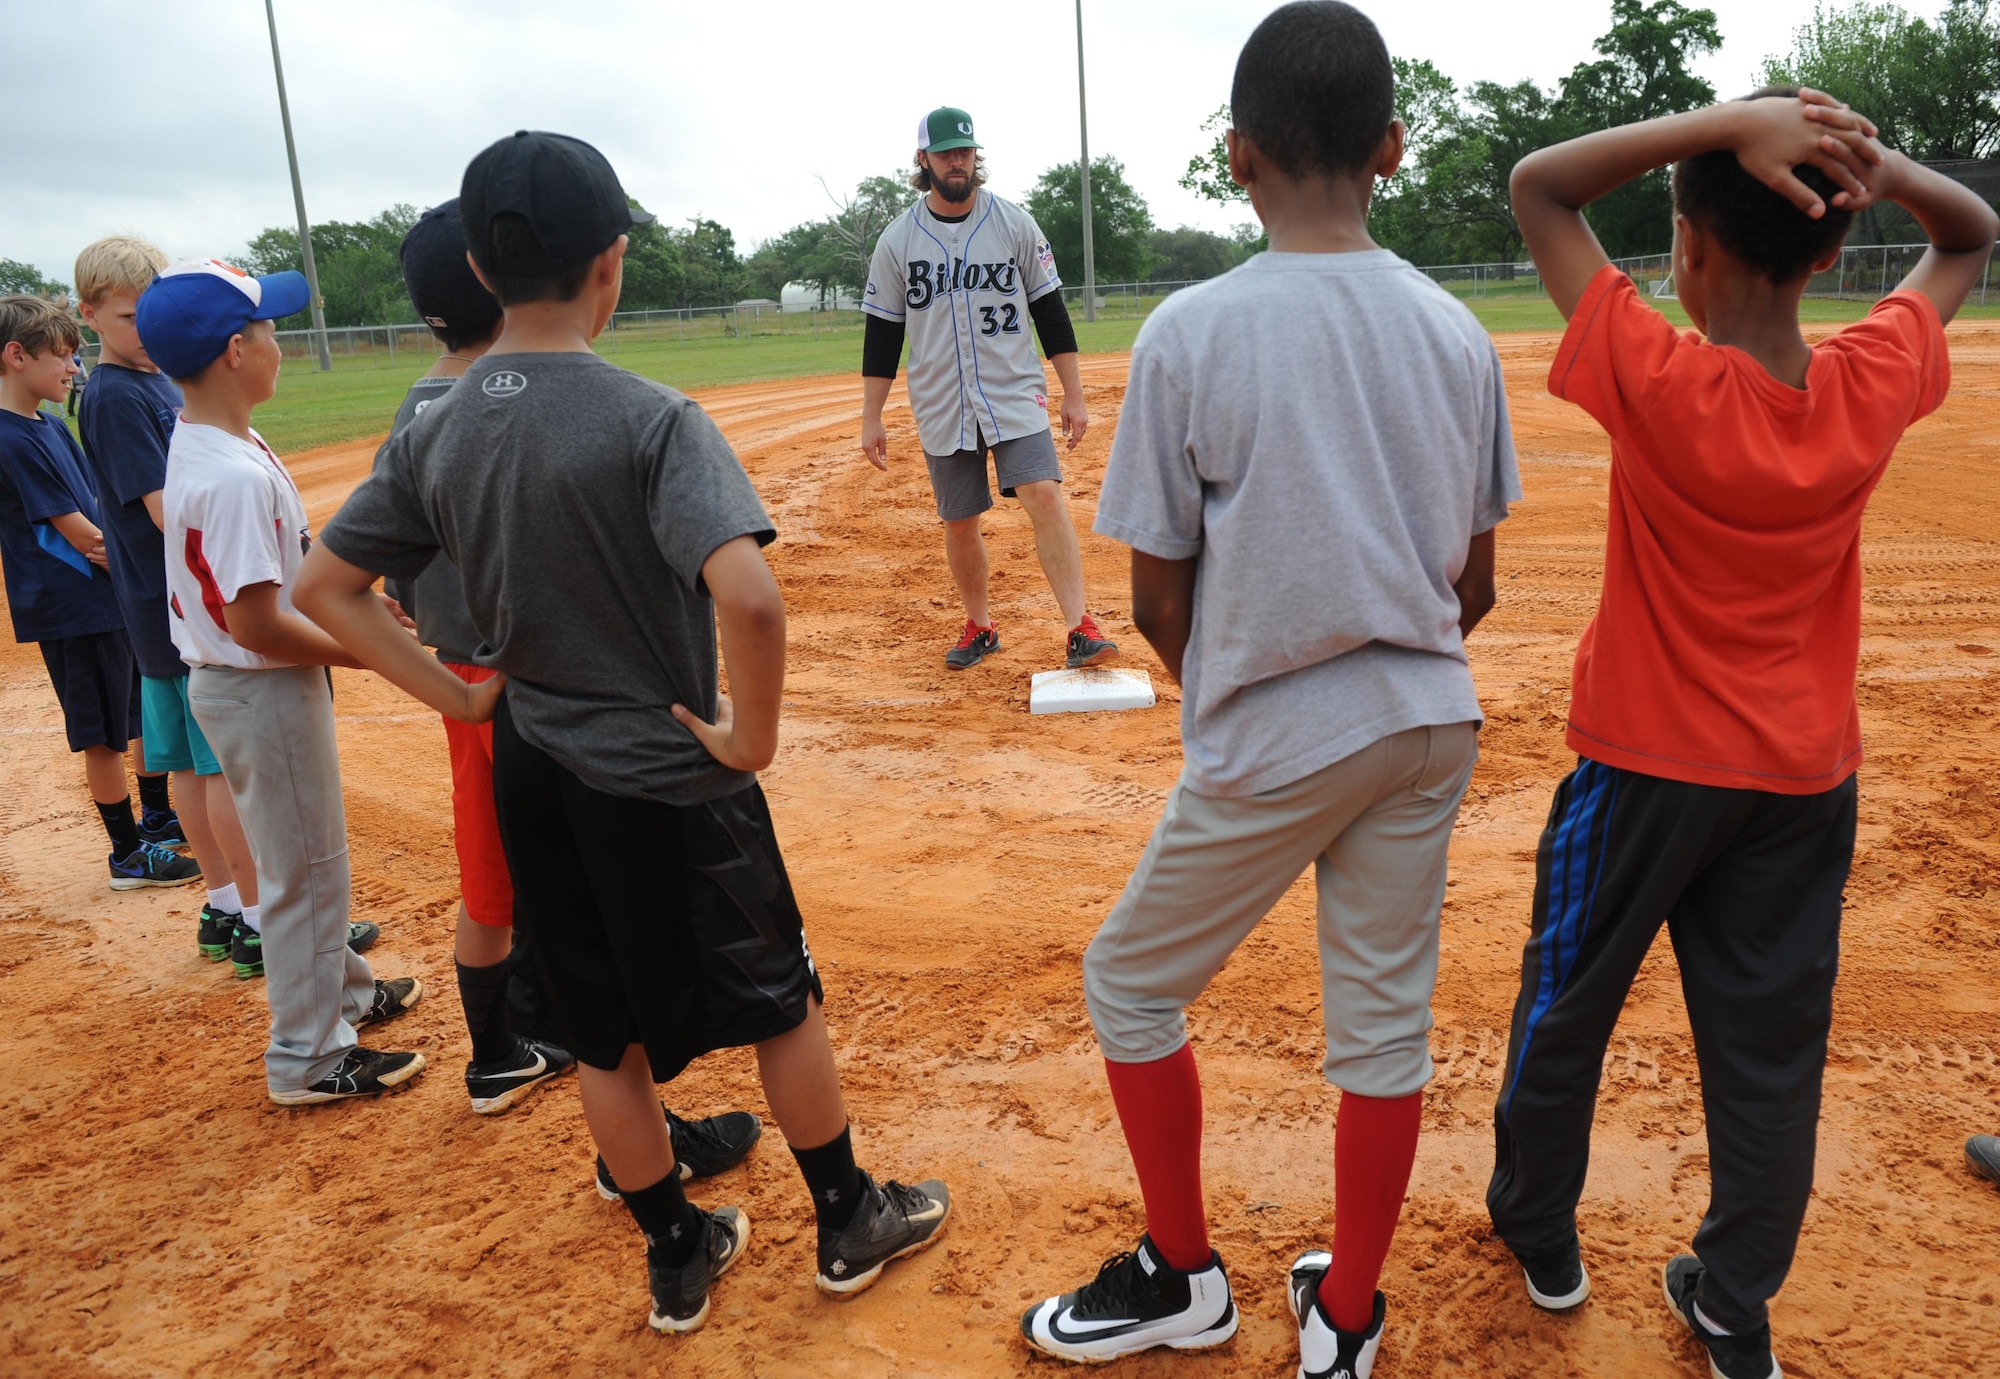 Daniel Tillman, Biloxi Shuckers pitcher, shows proper foot placement during the Biloxi Shucker’s Youth Baseball Clinic at the youth center baseball field April 30, 2016, Keesler Air Force Base, Miss. The clinic provided hitting, pitching, base running and fielding instruction from members of the Biloxi Shucker’s minor league baseball team. (U.S. Air Force photo by Kemberly Groue)